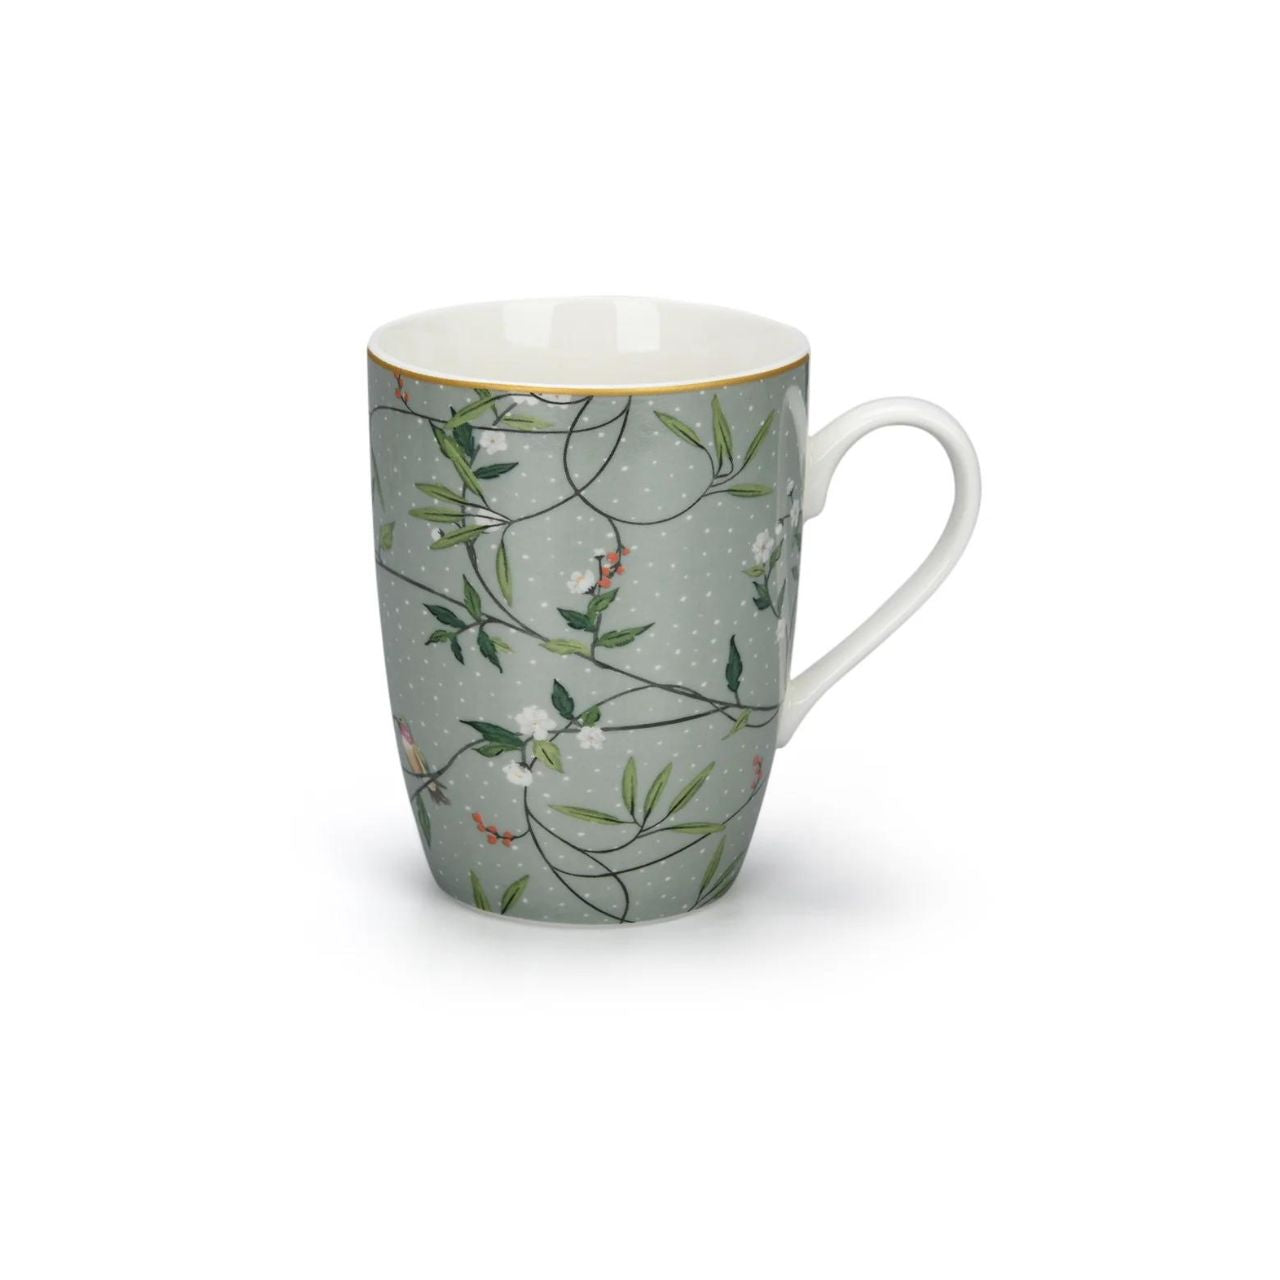 Alice Bell Collection Set of 6 Mugs by Mindy Brownes  This Mindy Brownes Alice Bell Collection Set of 6 Mugs is perfect for any occasion. Crafted with high quality porcelain, these mugs feature unique green and intricate floral designs that are sure to bring some charm to your kitchen. Enjoy a hot beverage with your friends and family with this Alice Bell Collection set.